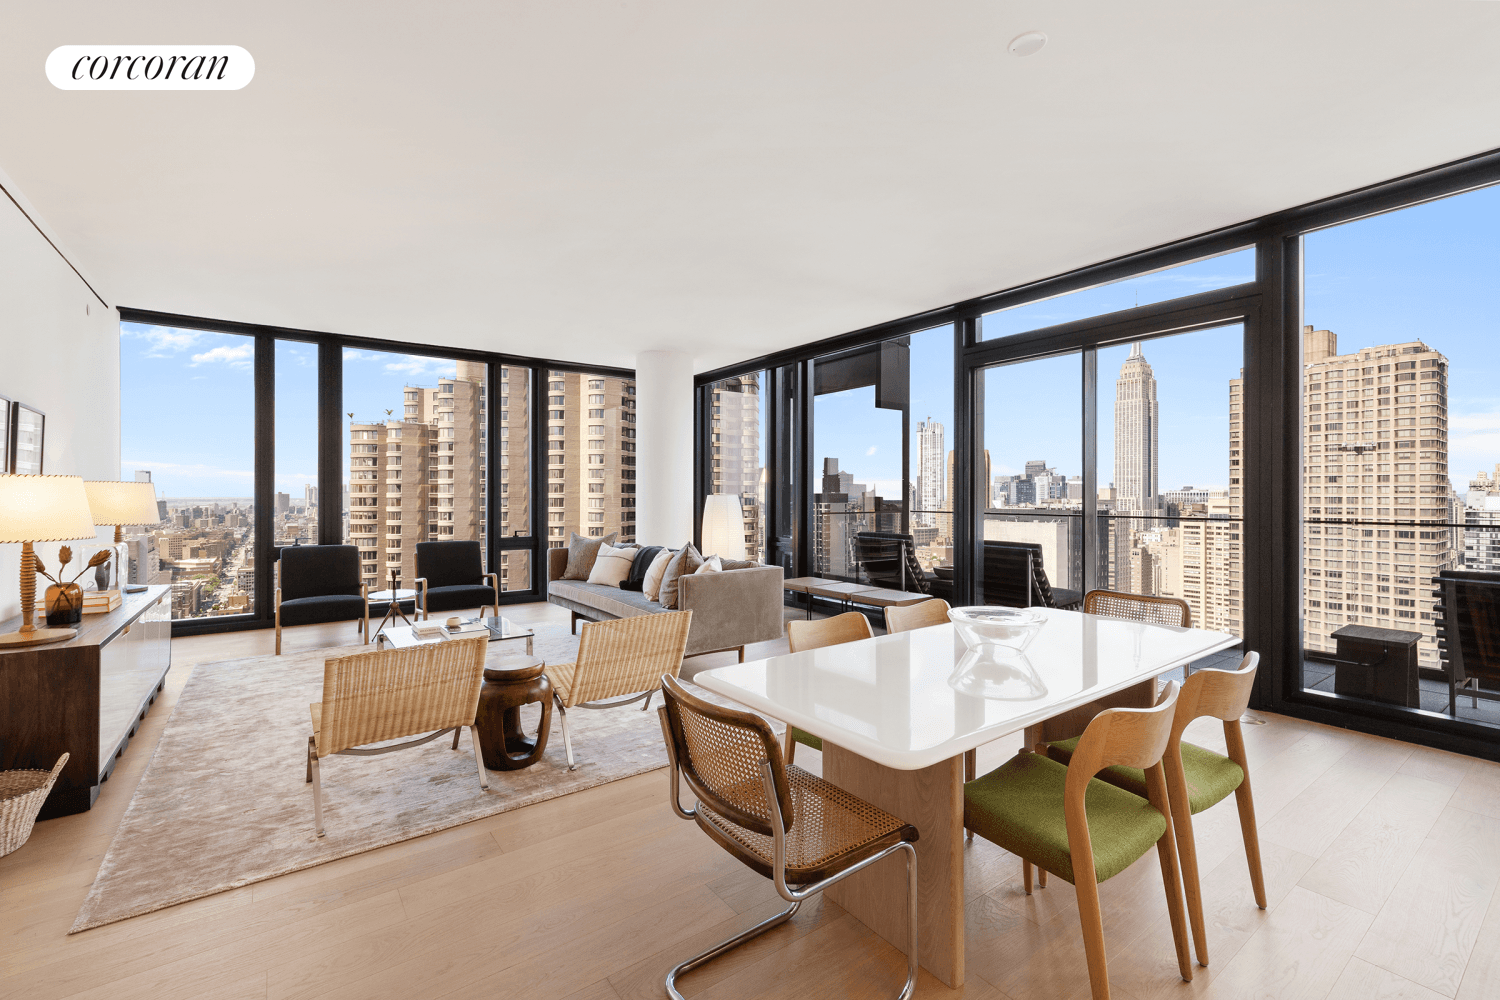 Residence 40E at One United Nations Park is a 2, 097sf three bedroom, three bathrooms plus powder room residence with sweeping southwest corner exposure.